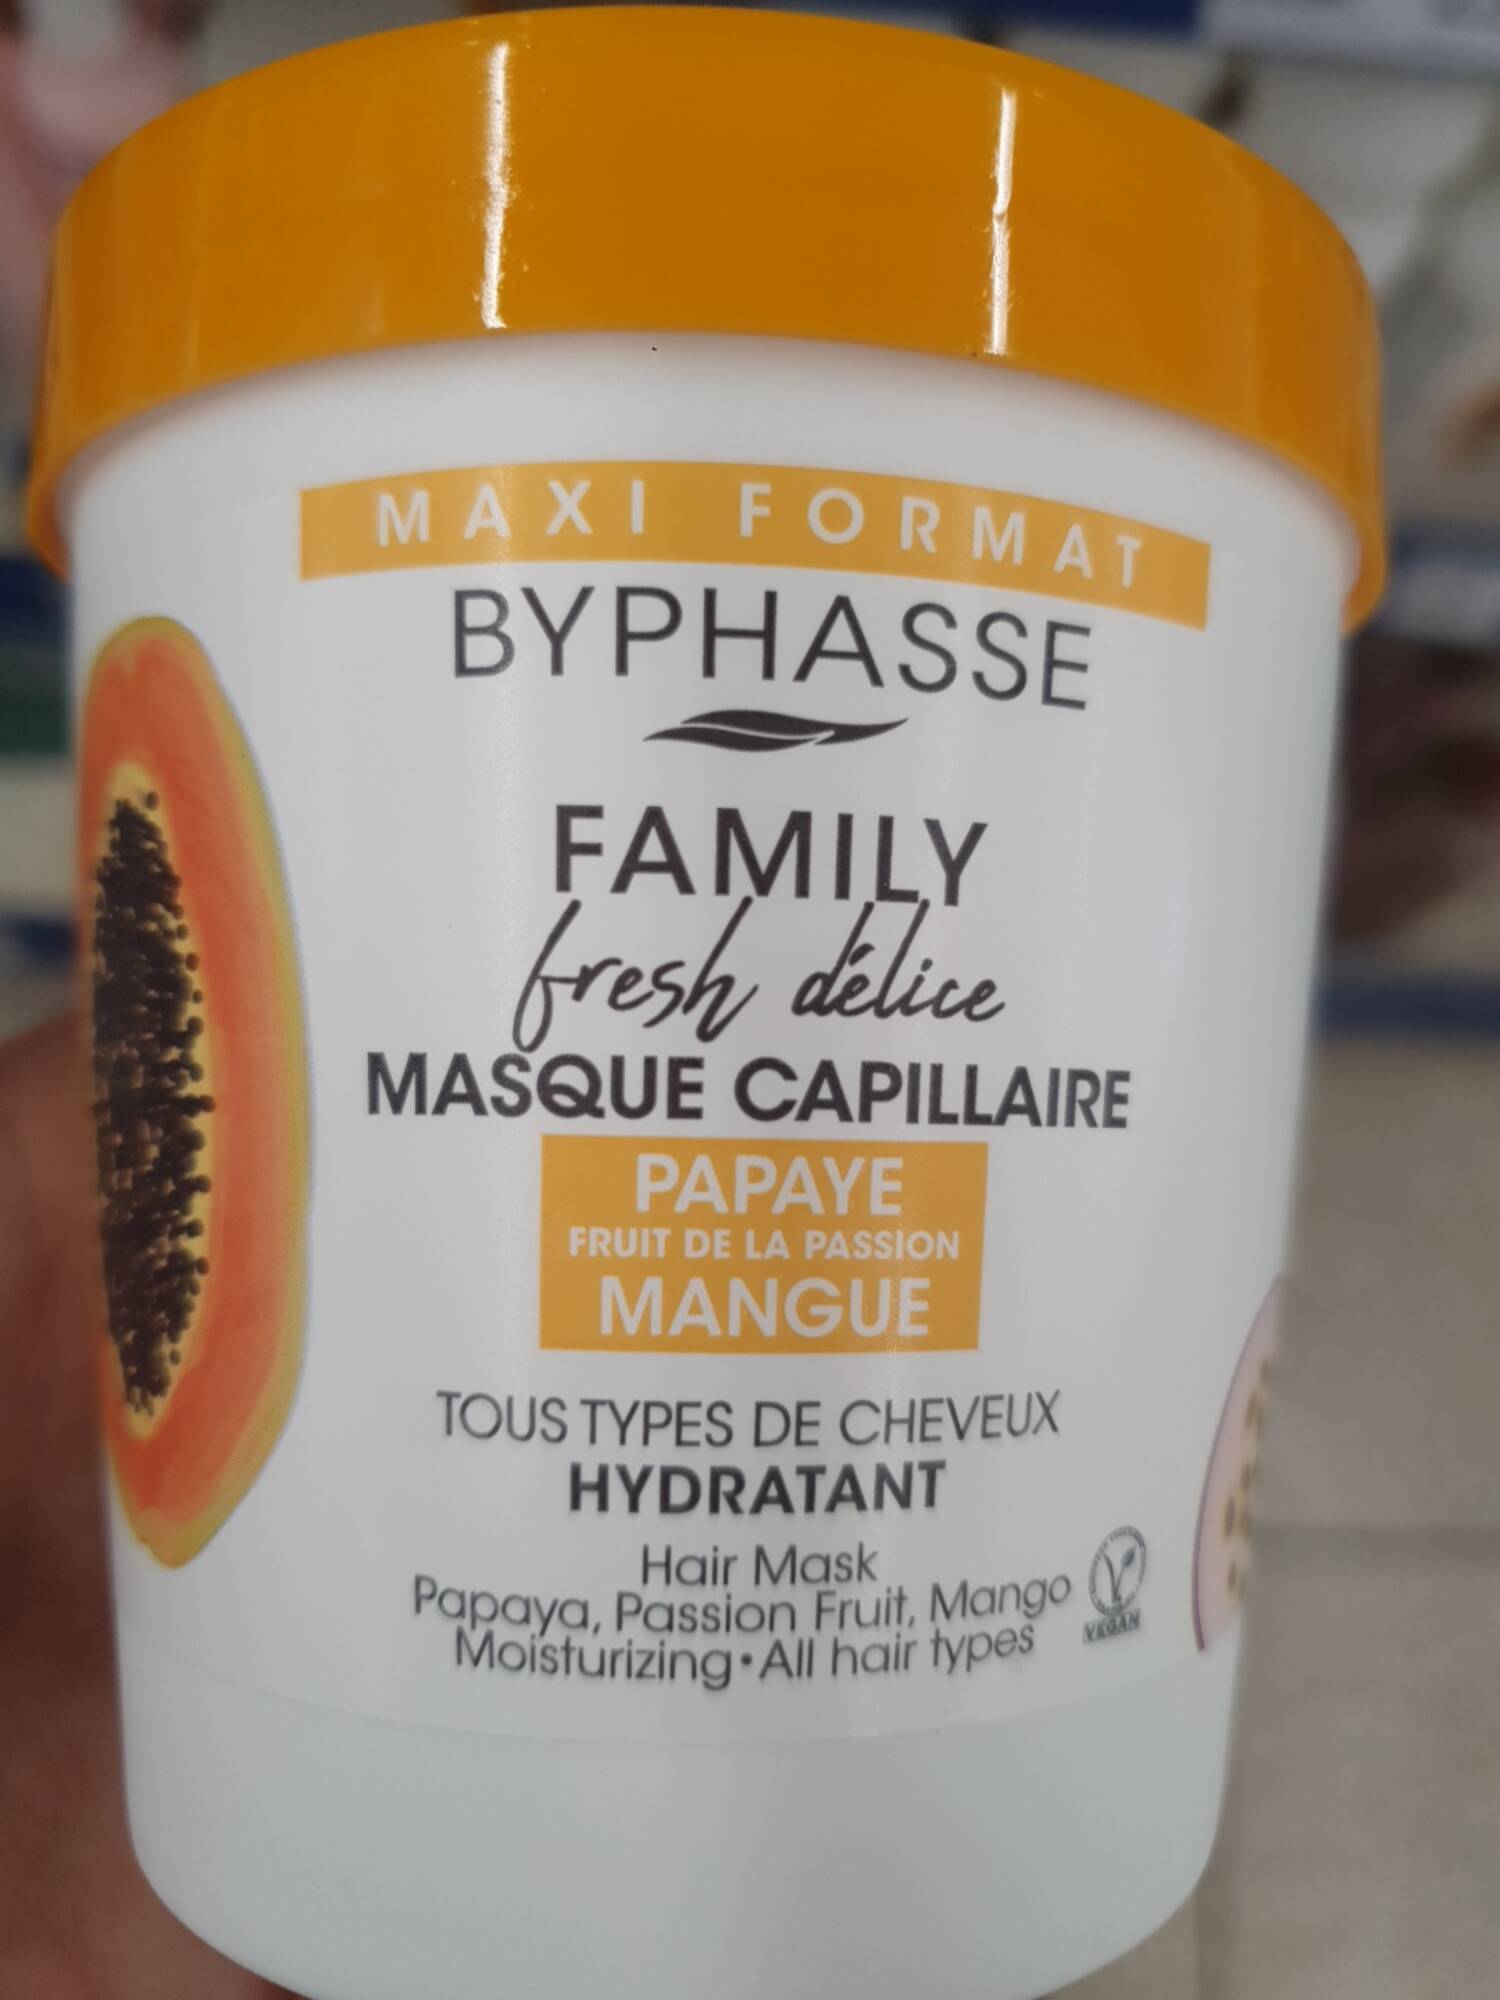 BYPHASSE - Family fresh délice - Masque capillaire 